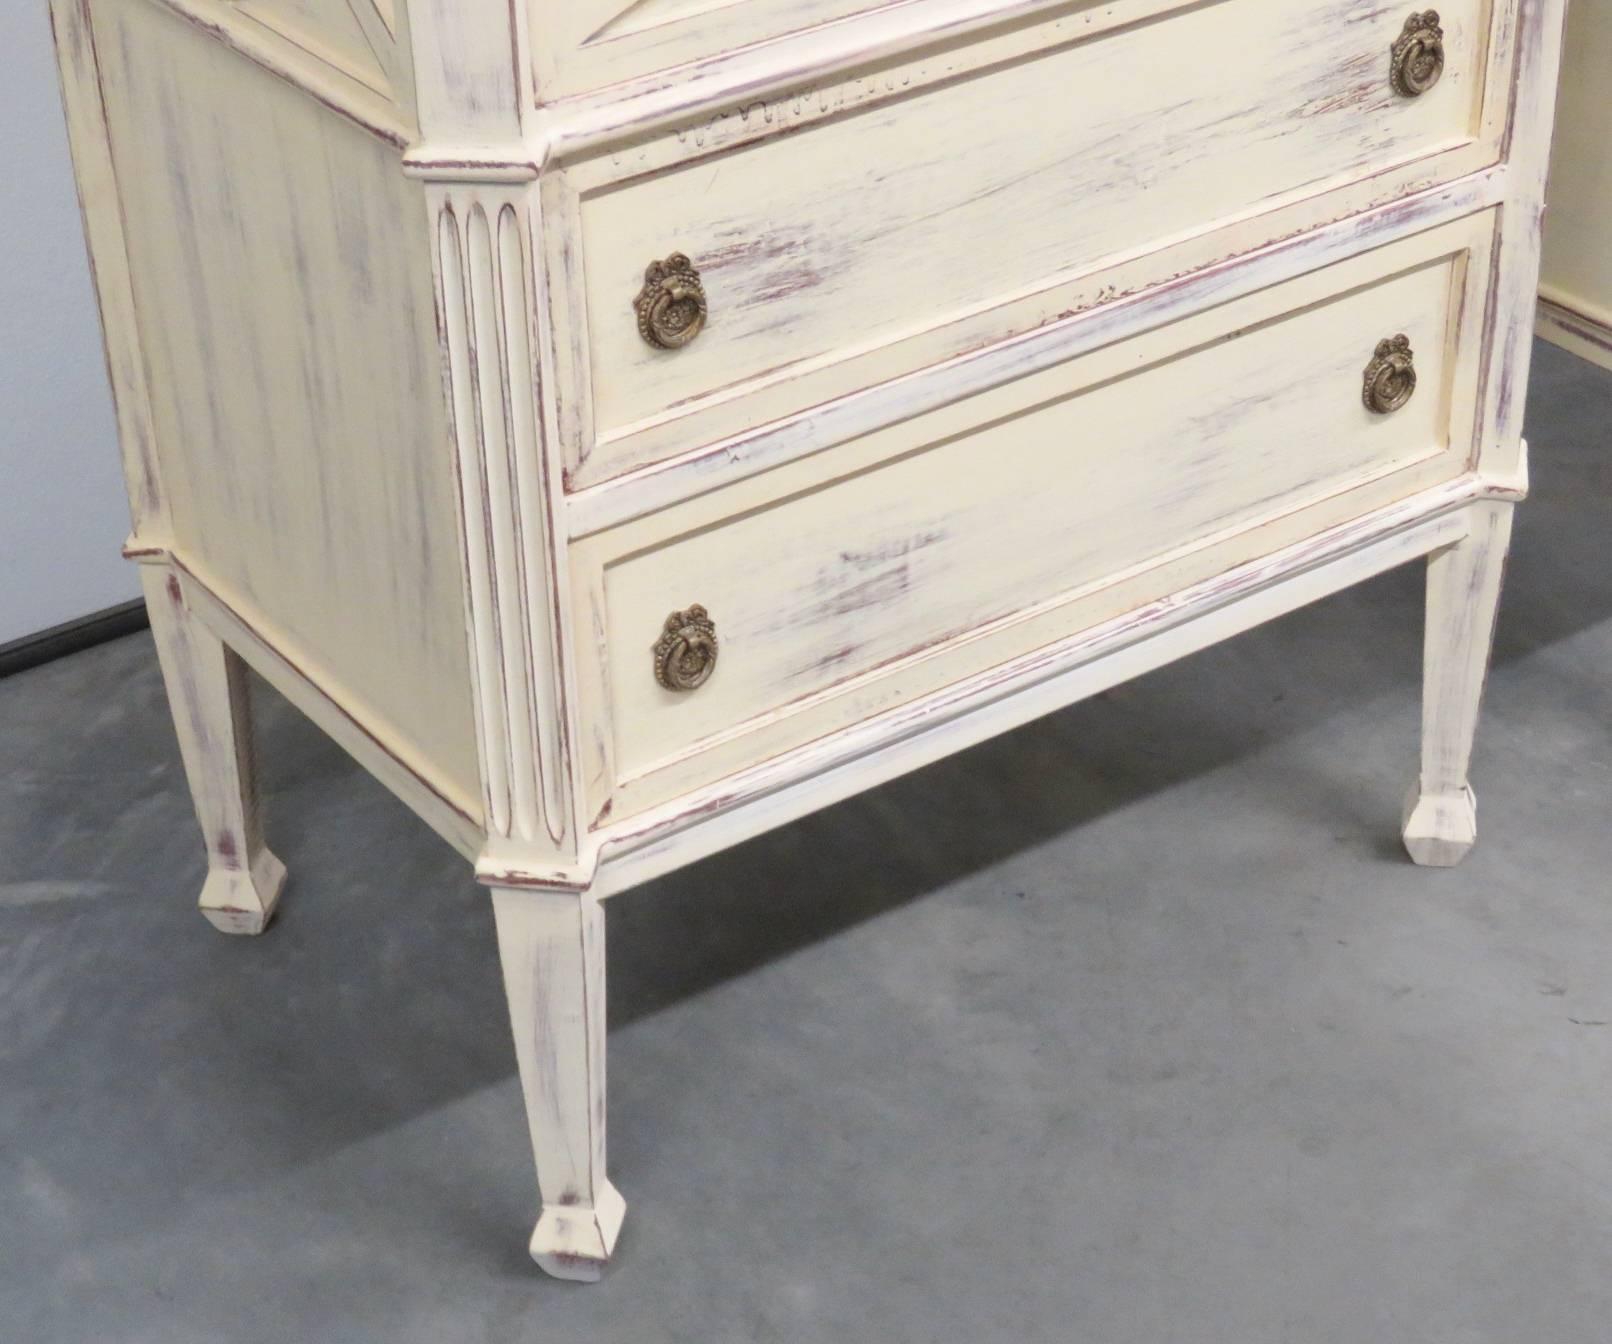 Distressed cream painted with three drawers and brass hardware.